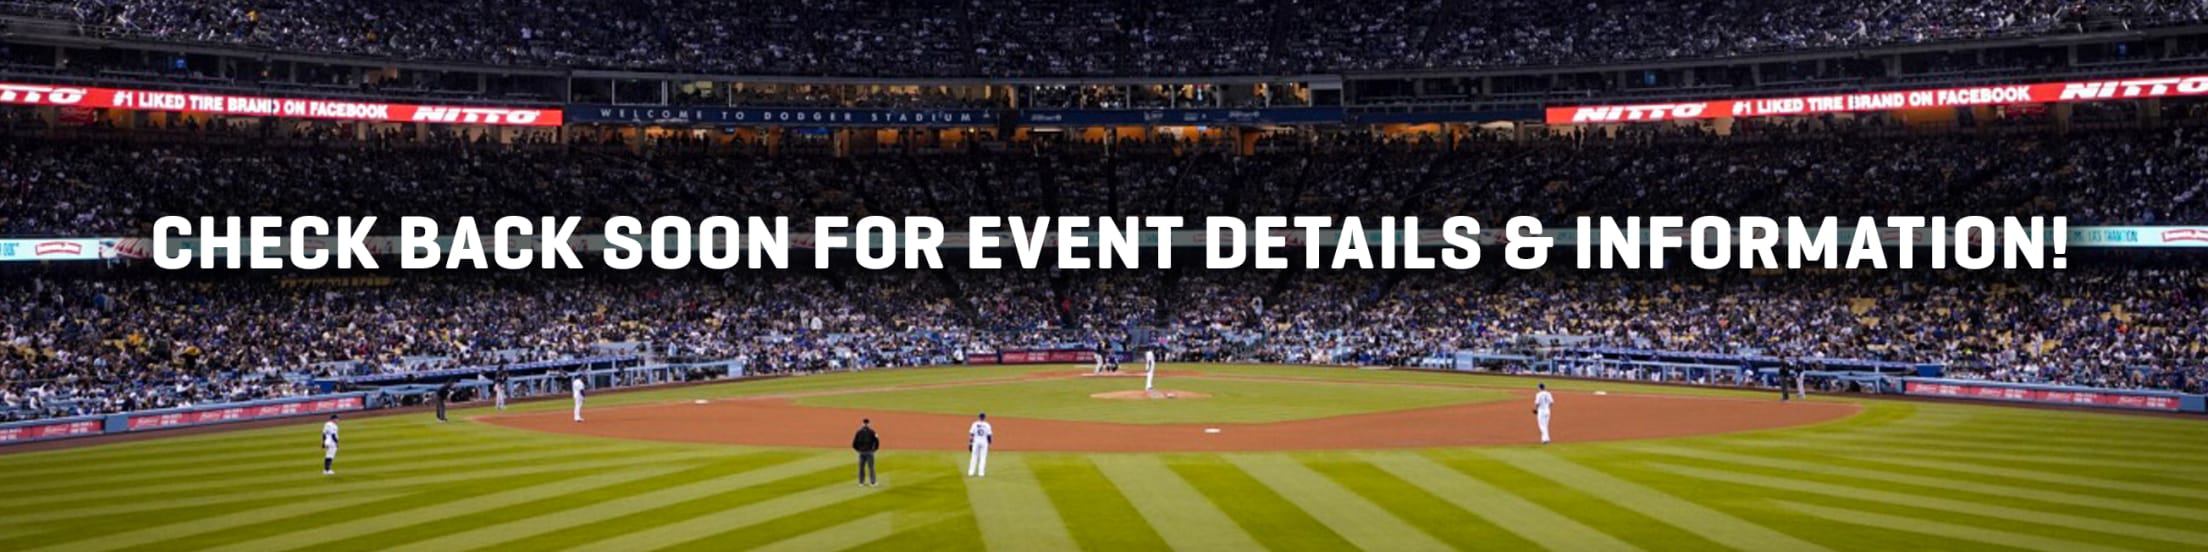 Los Angeles Dodgers Ticket Packages, 2019 Special Event Games: Mexican  Heritage Night, Pups At The Park Lakers Night & More At Dodger Stadium